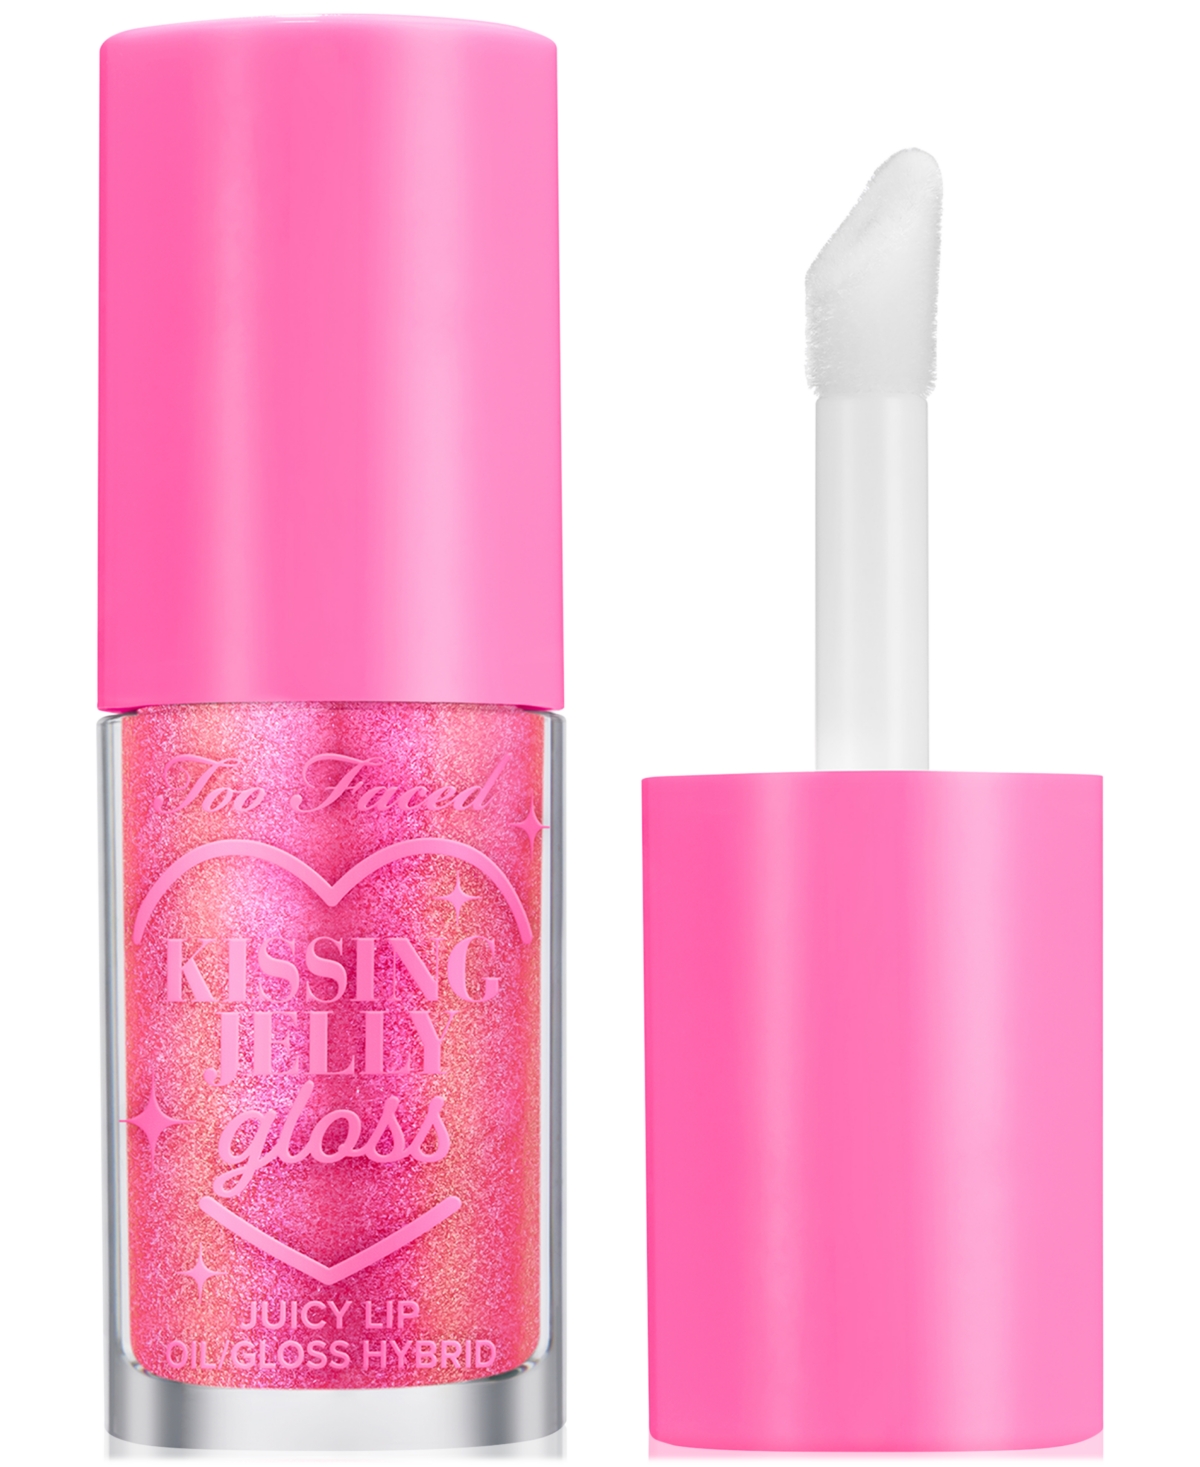 Too Faced Kissing Jelly Gloss In Bubblegum